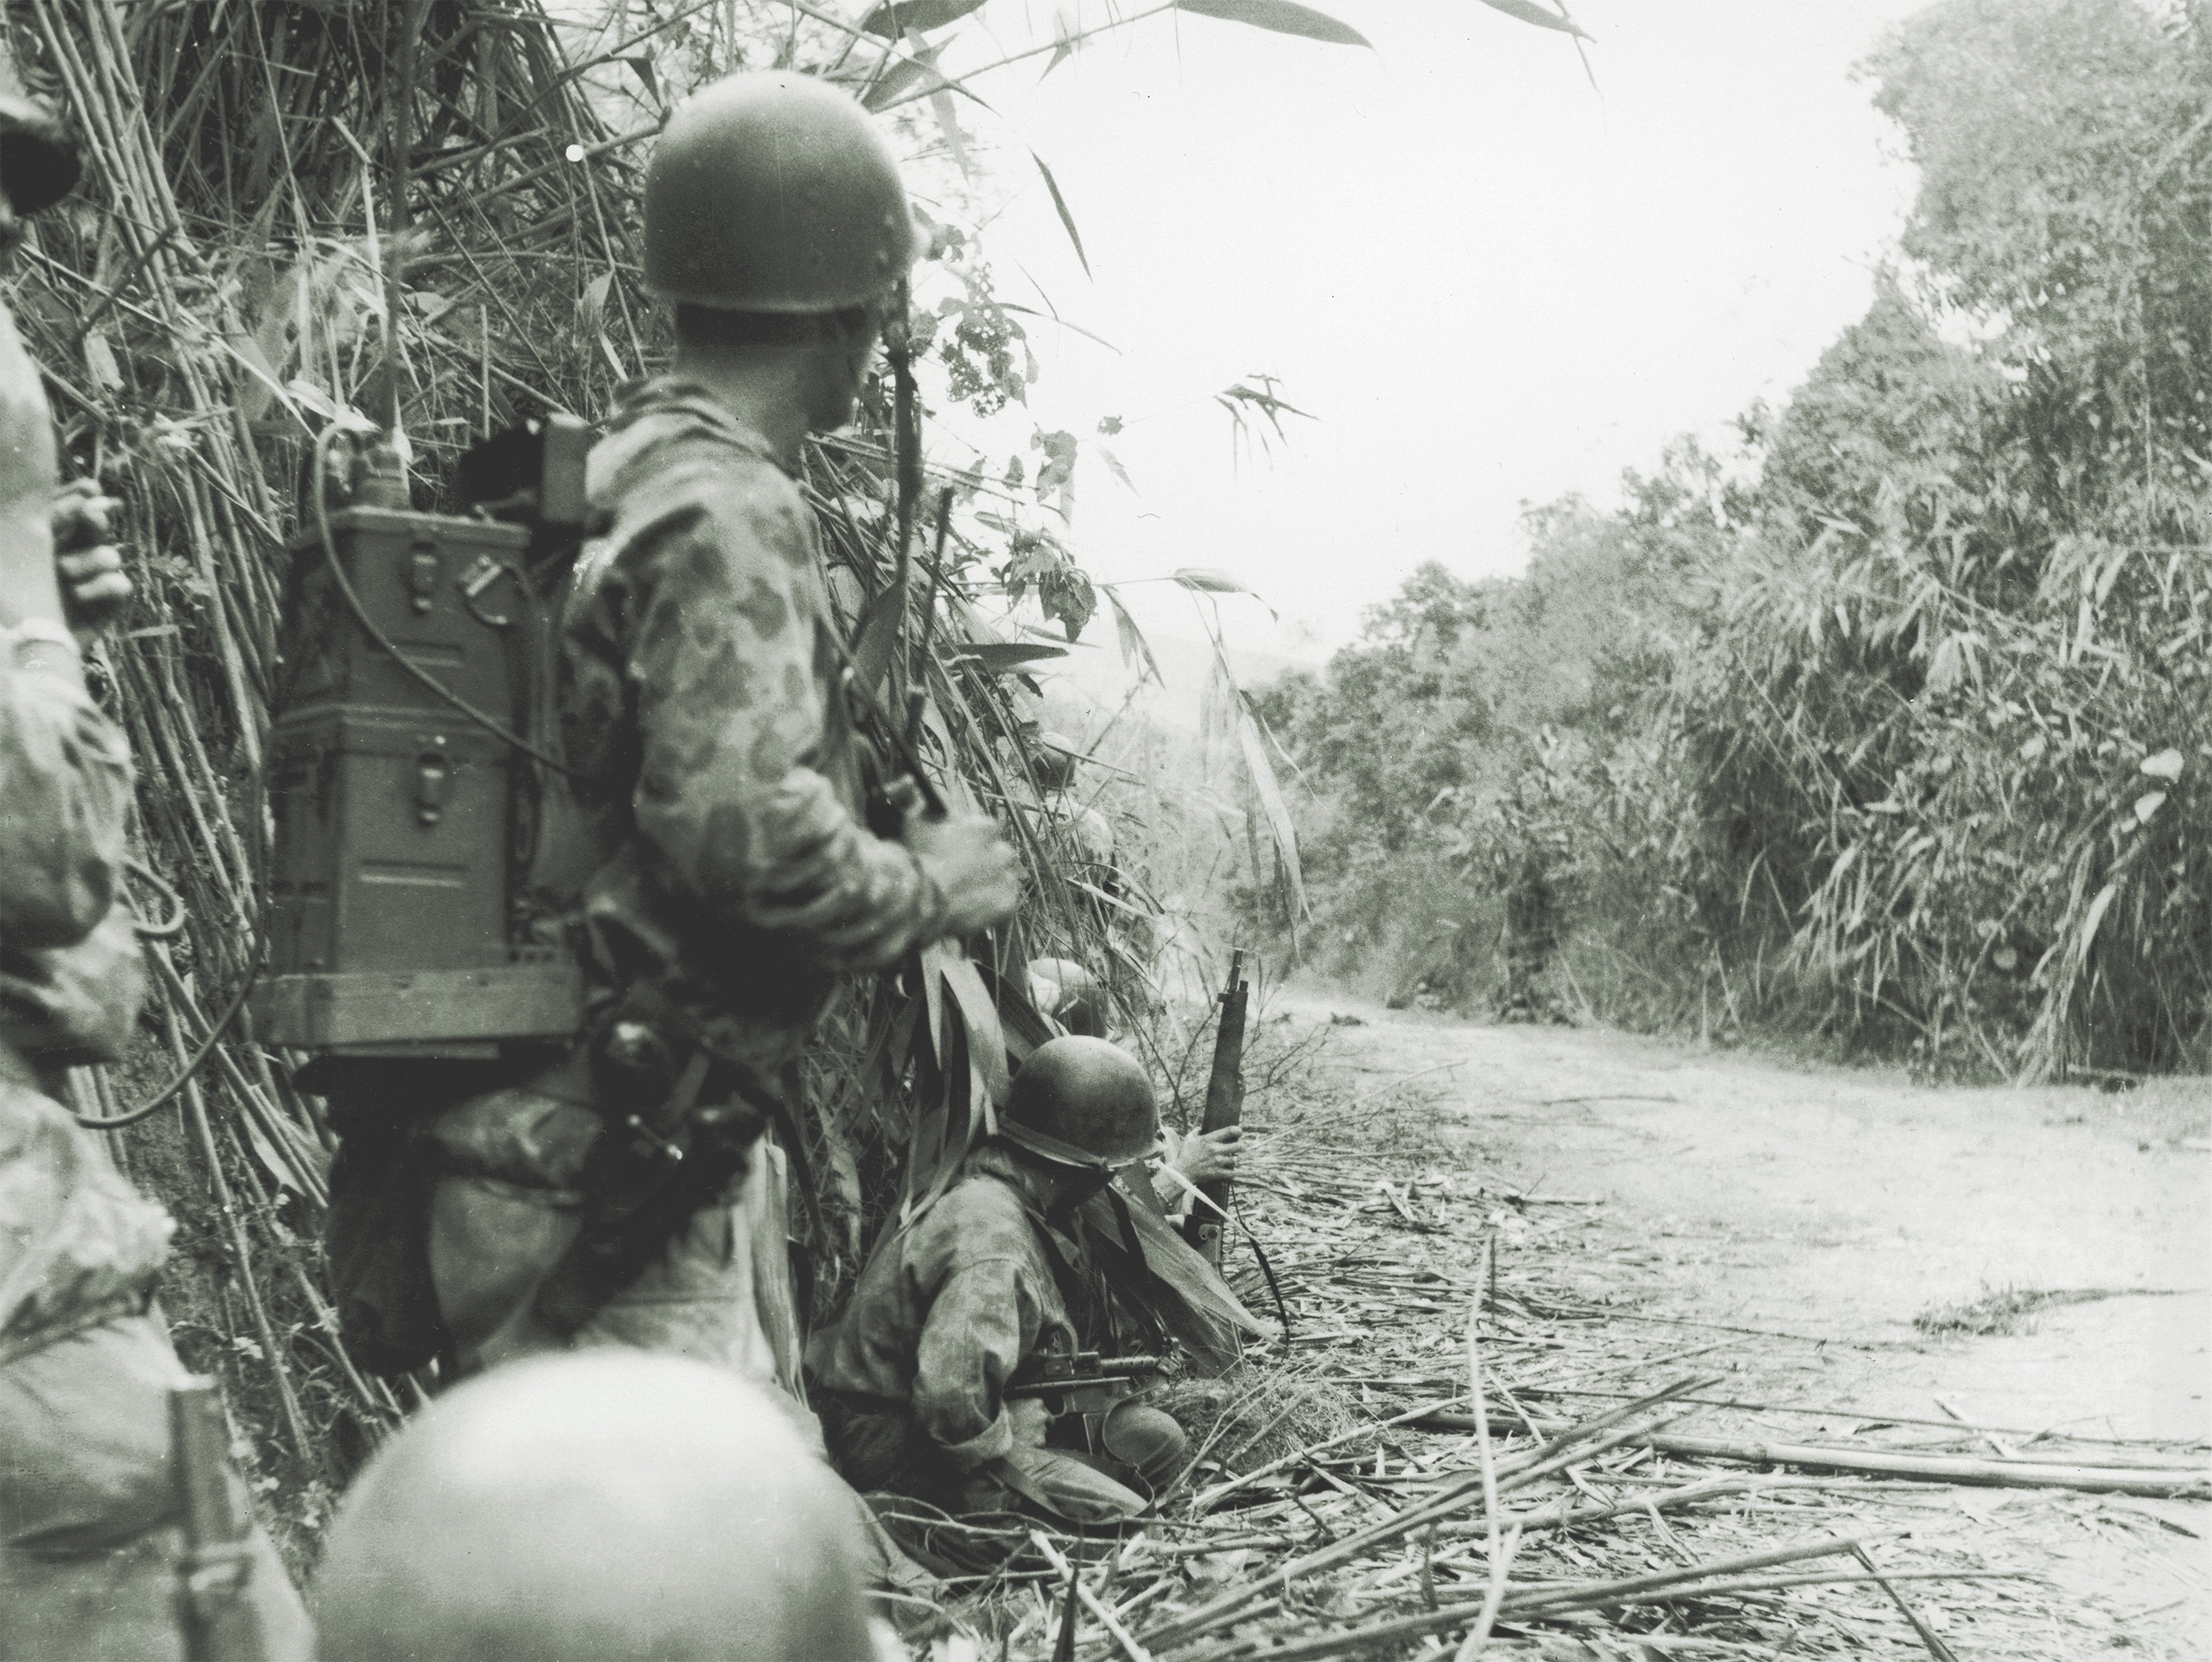 Having come under Vietminh fire, paratroopers of the French Foreign Legion warily scan the road ahead. (Hulton Archive, Getty Images)